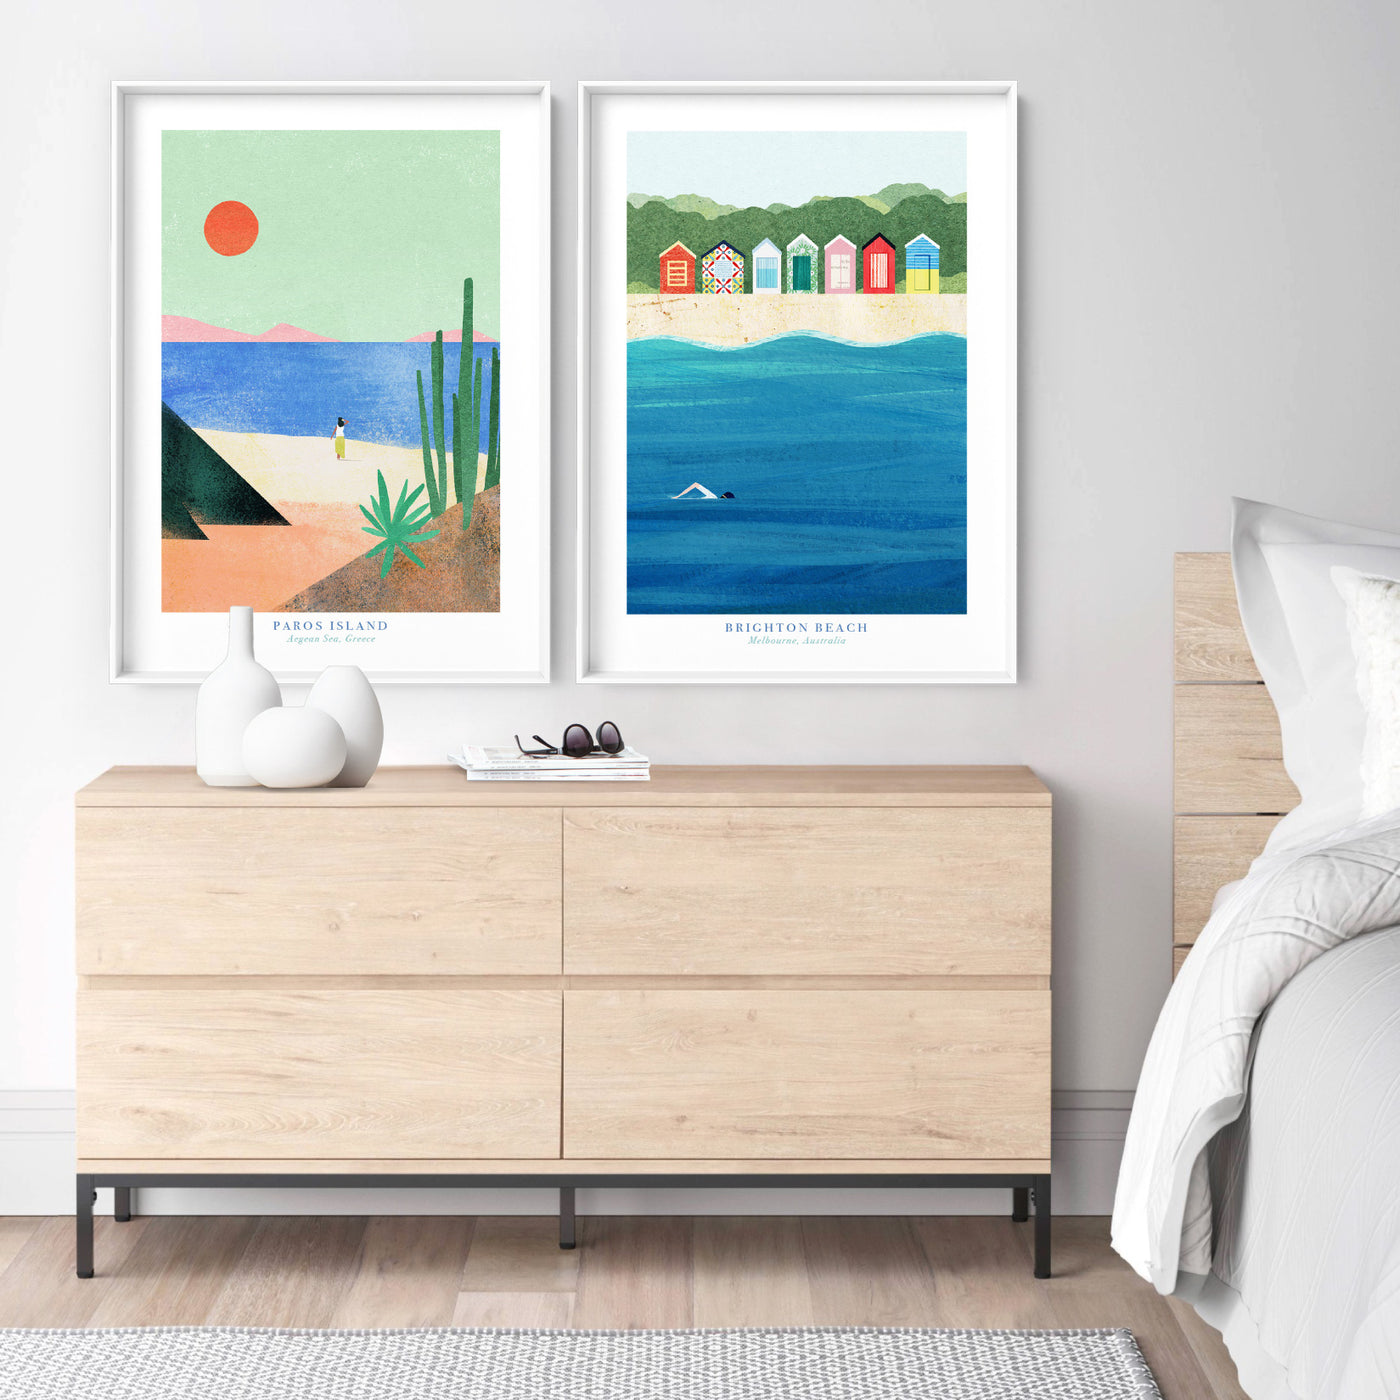 Brighton Beach Illustration - Art Print by Henry Rivers, Poster, Stretched Canvas or Framed Wall Art, shown framed in a home interior space